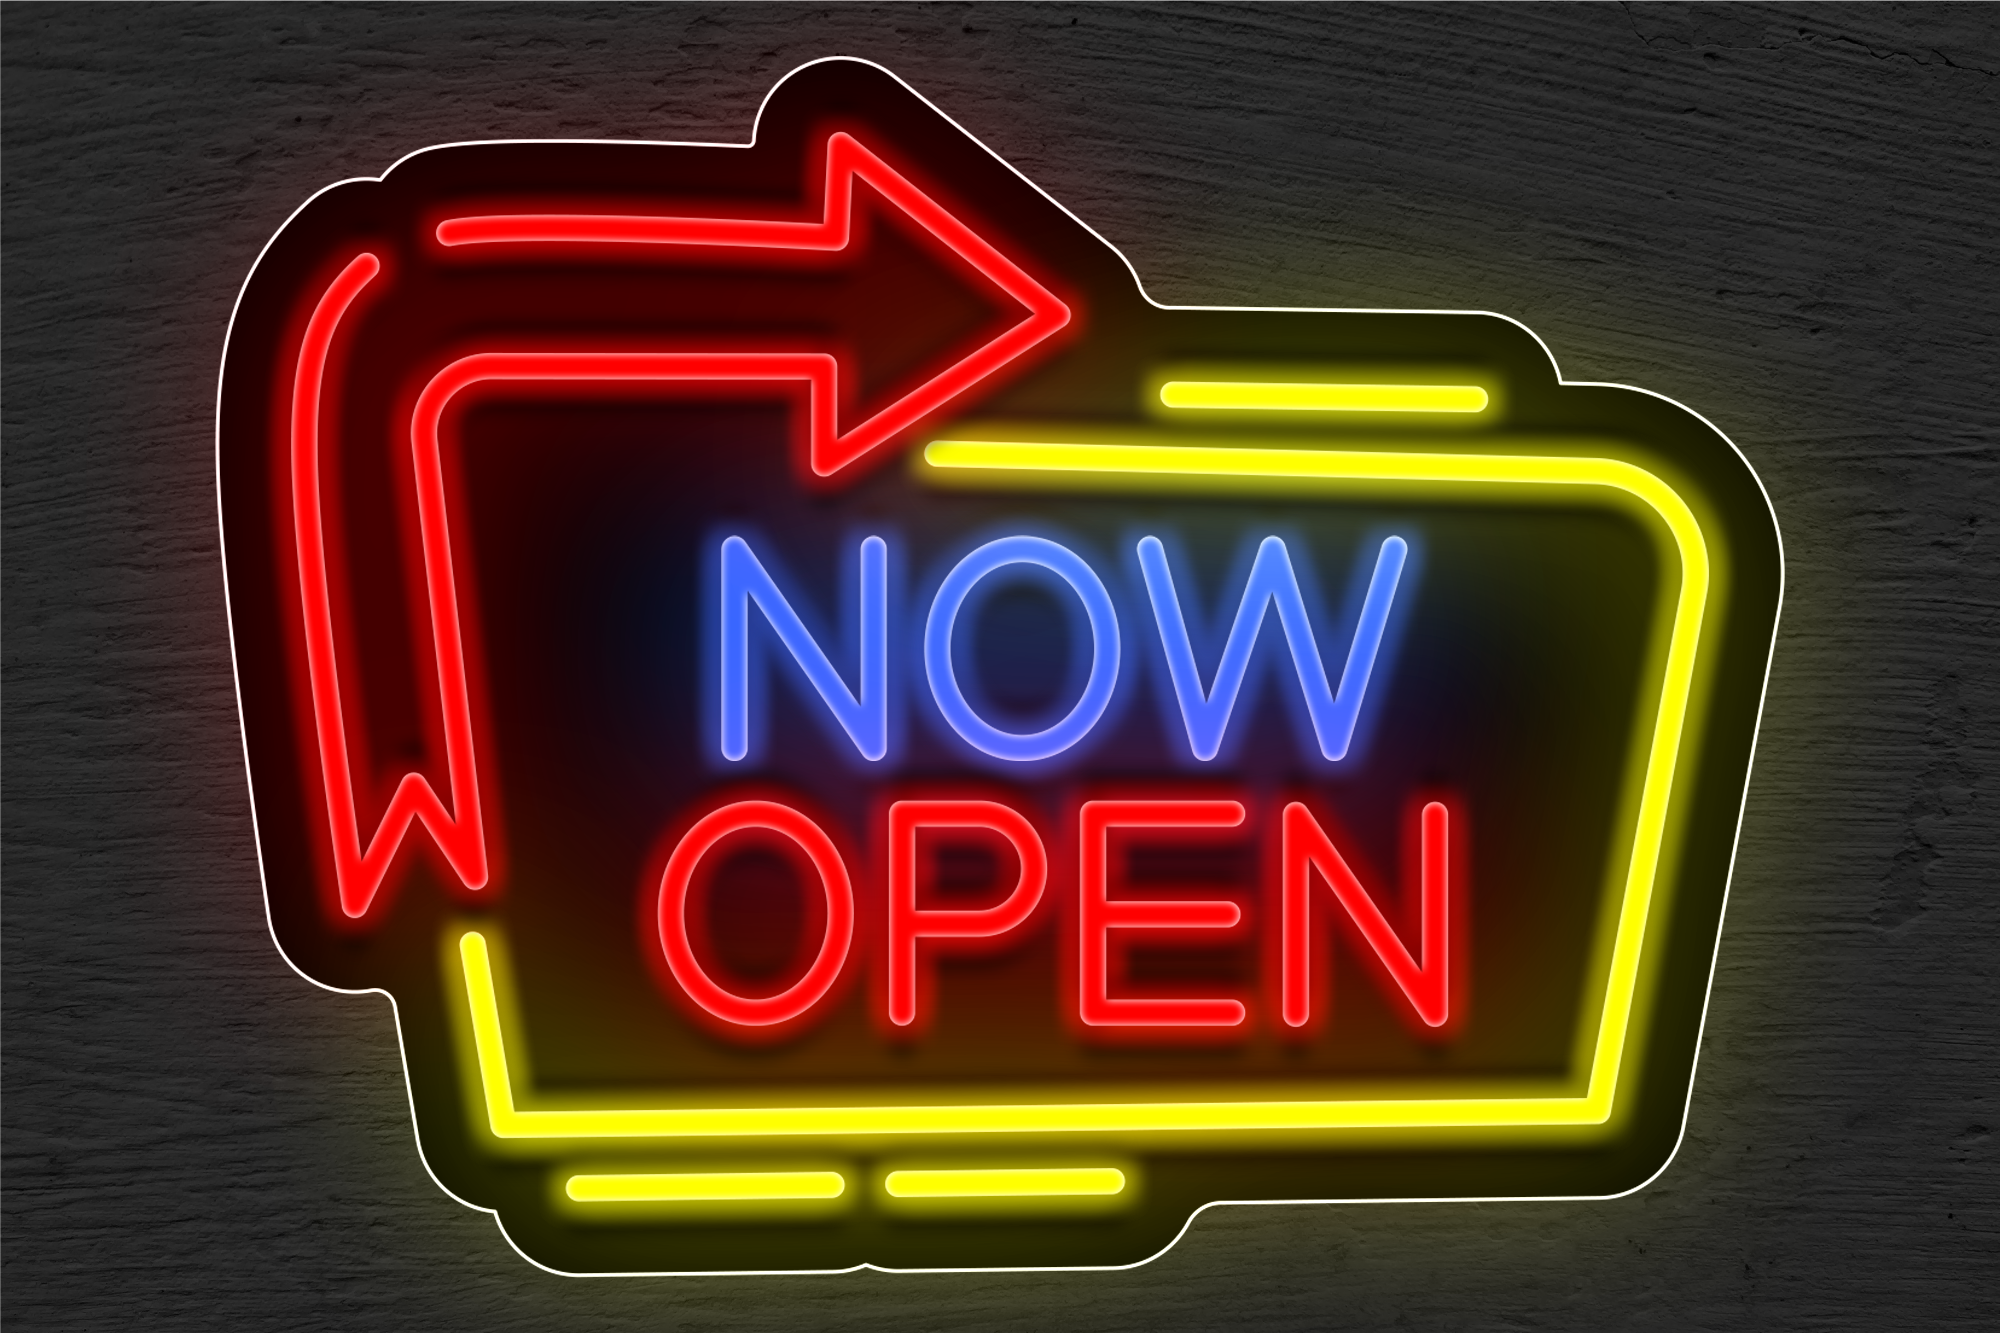 Multi-color "NOW OPEN" with Arrow LED Neon Sign